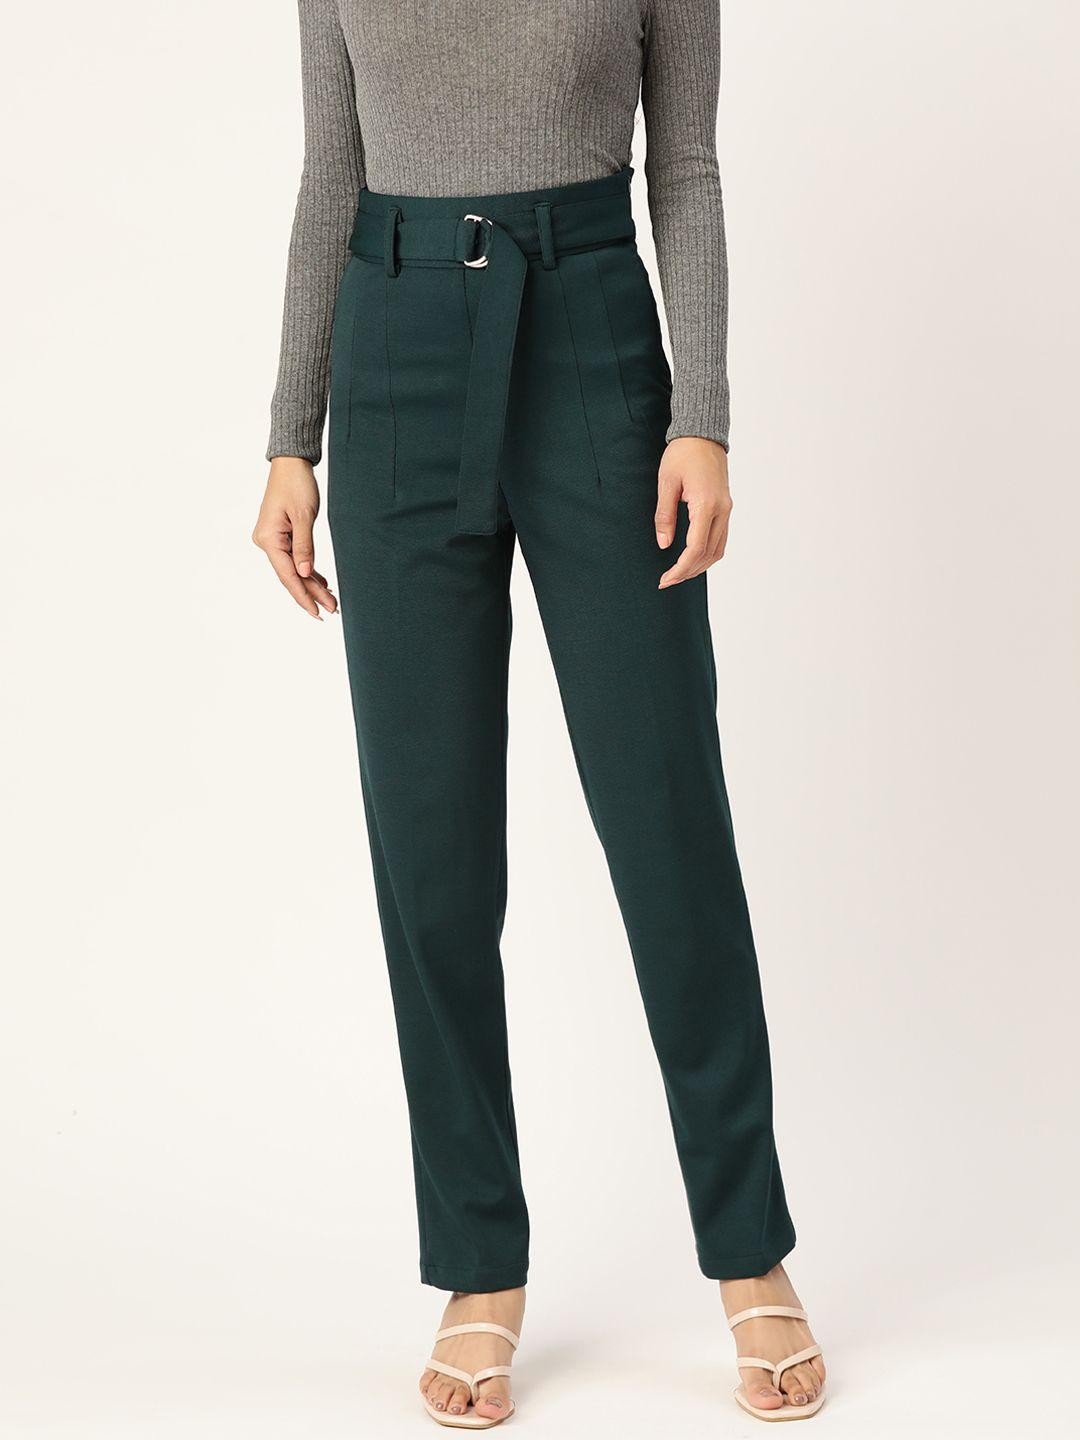 zastraa women teal green solid smart slim fit high-rise trousers